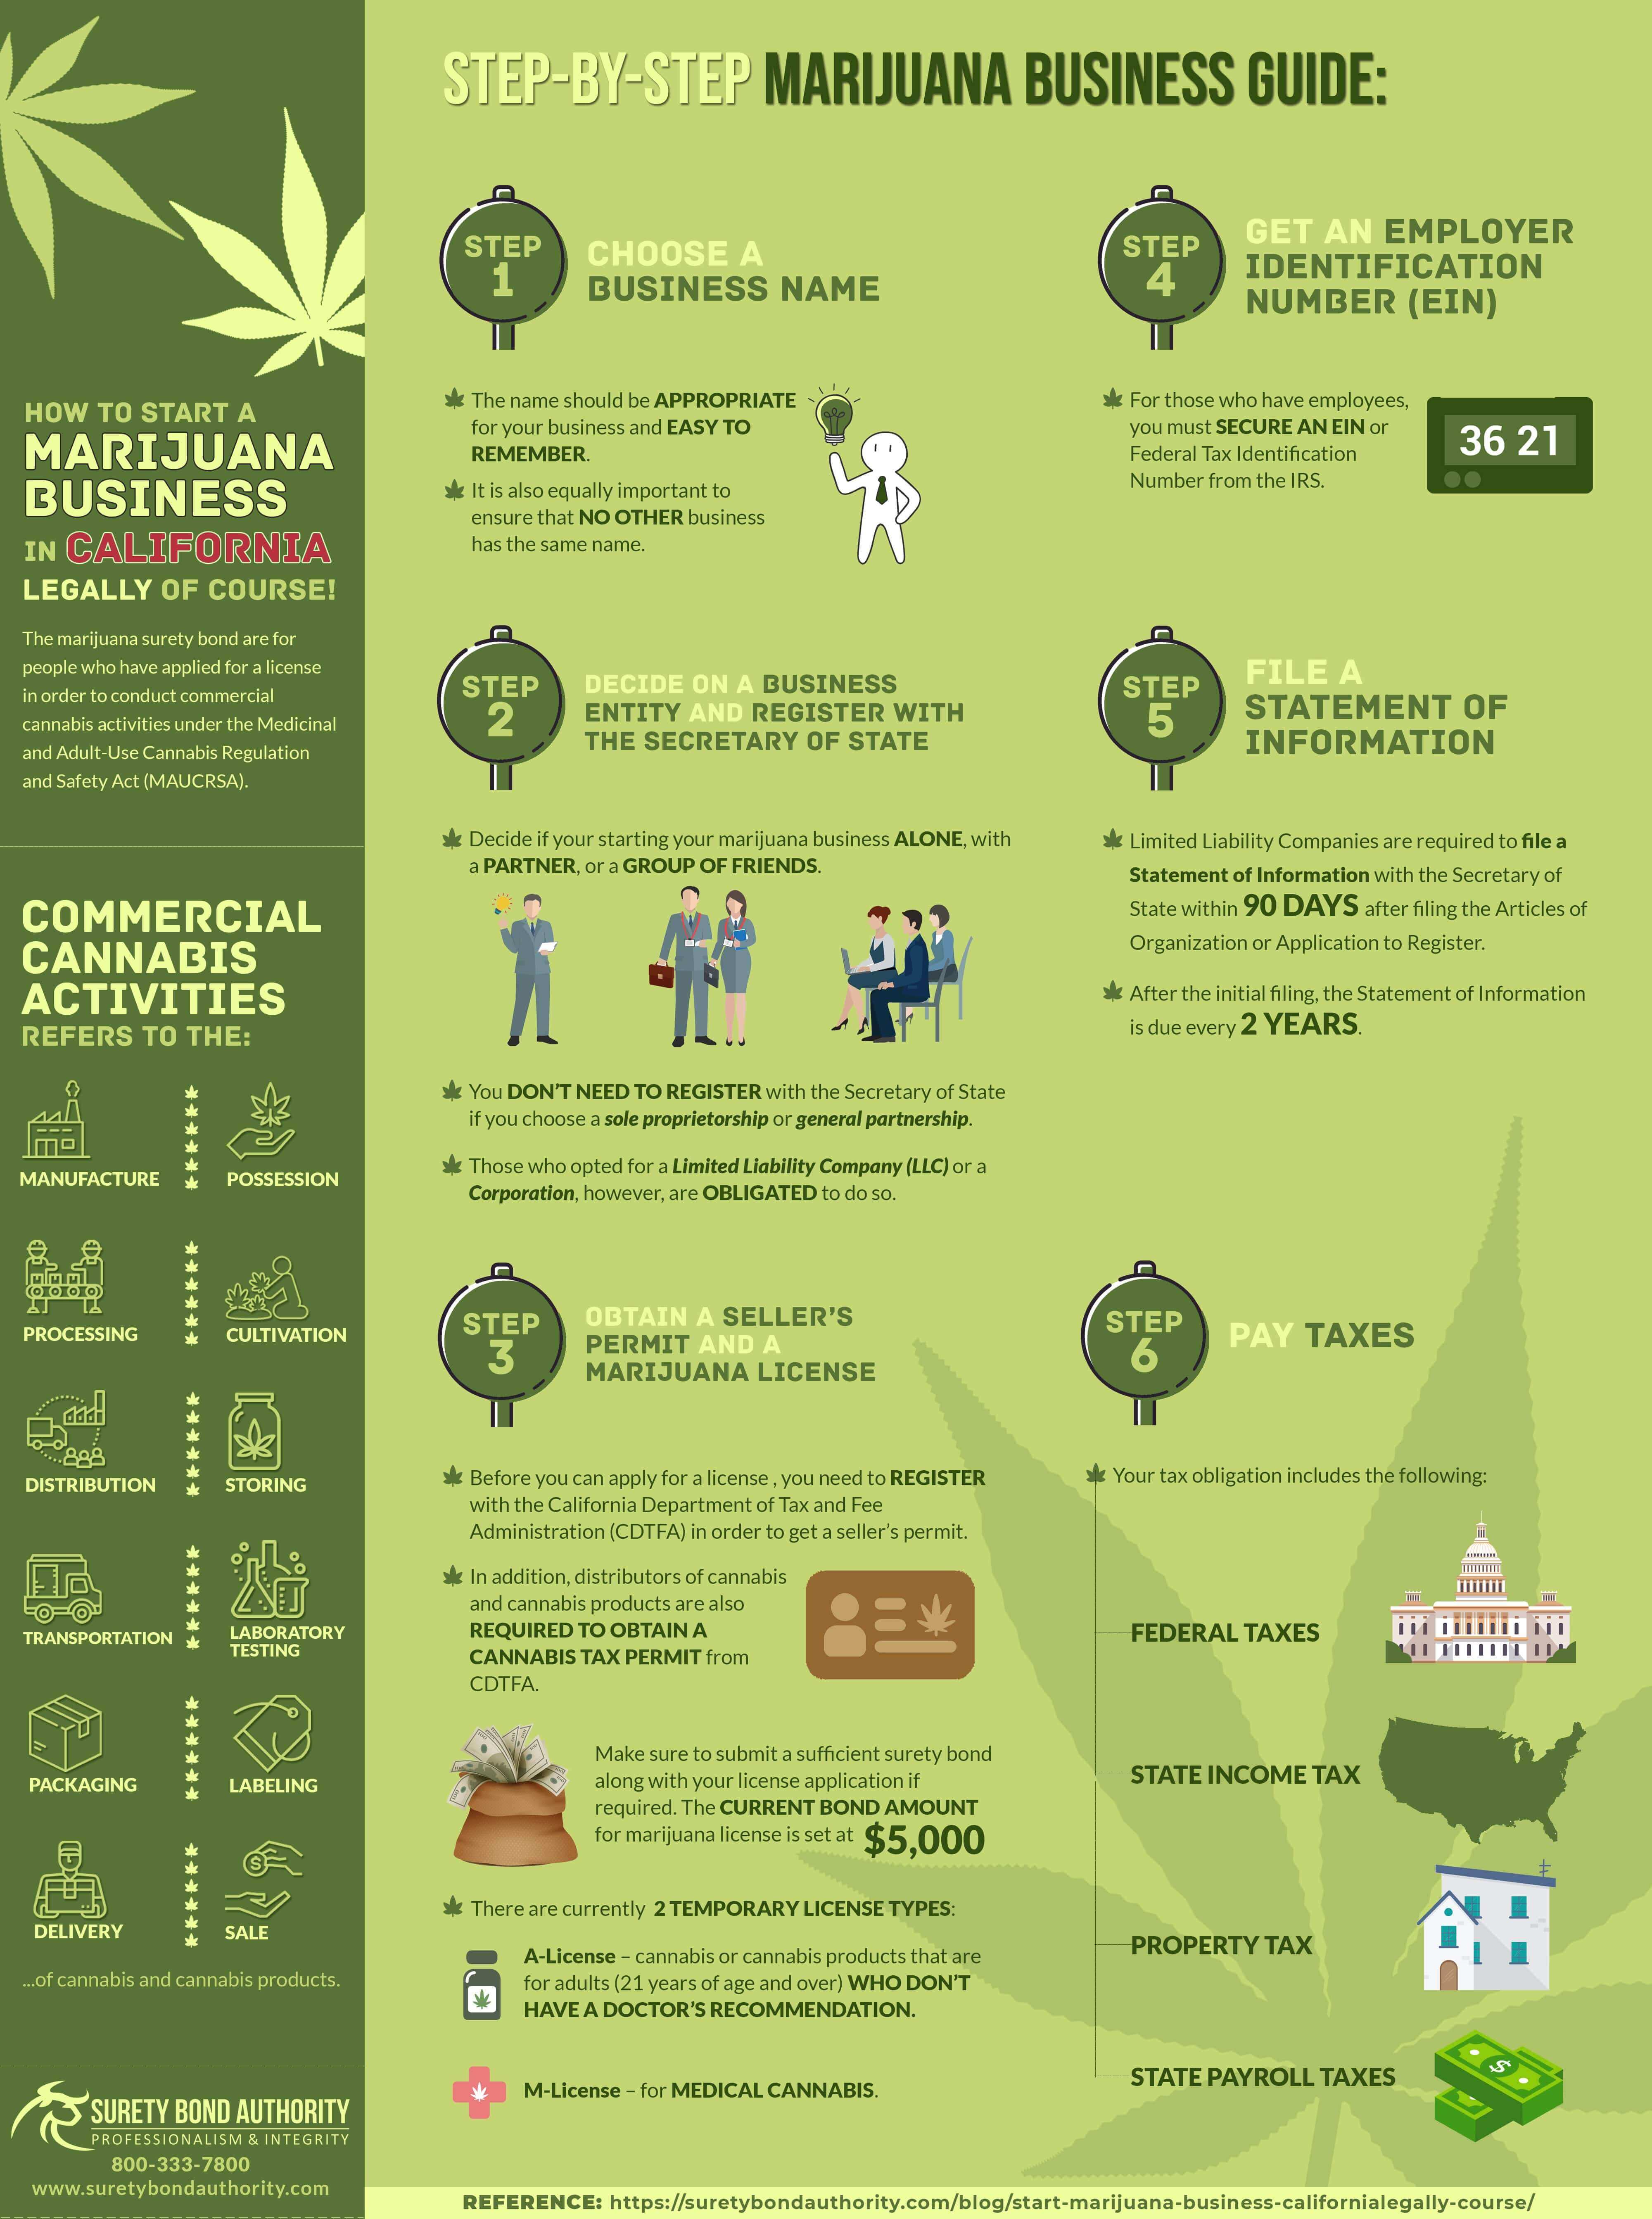 Step-by-step guide in starting a marijuana business in California Infographic